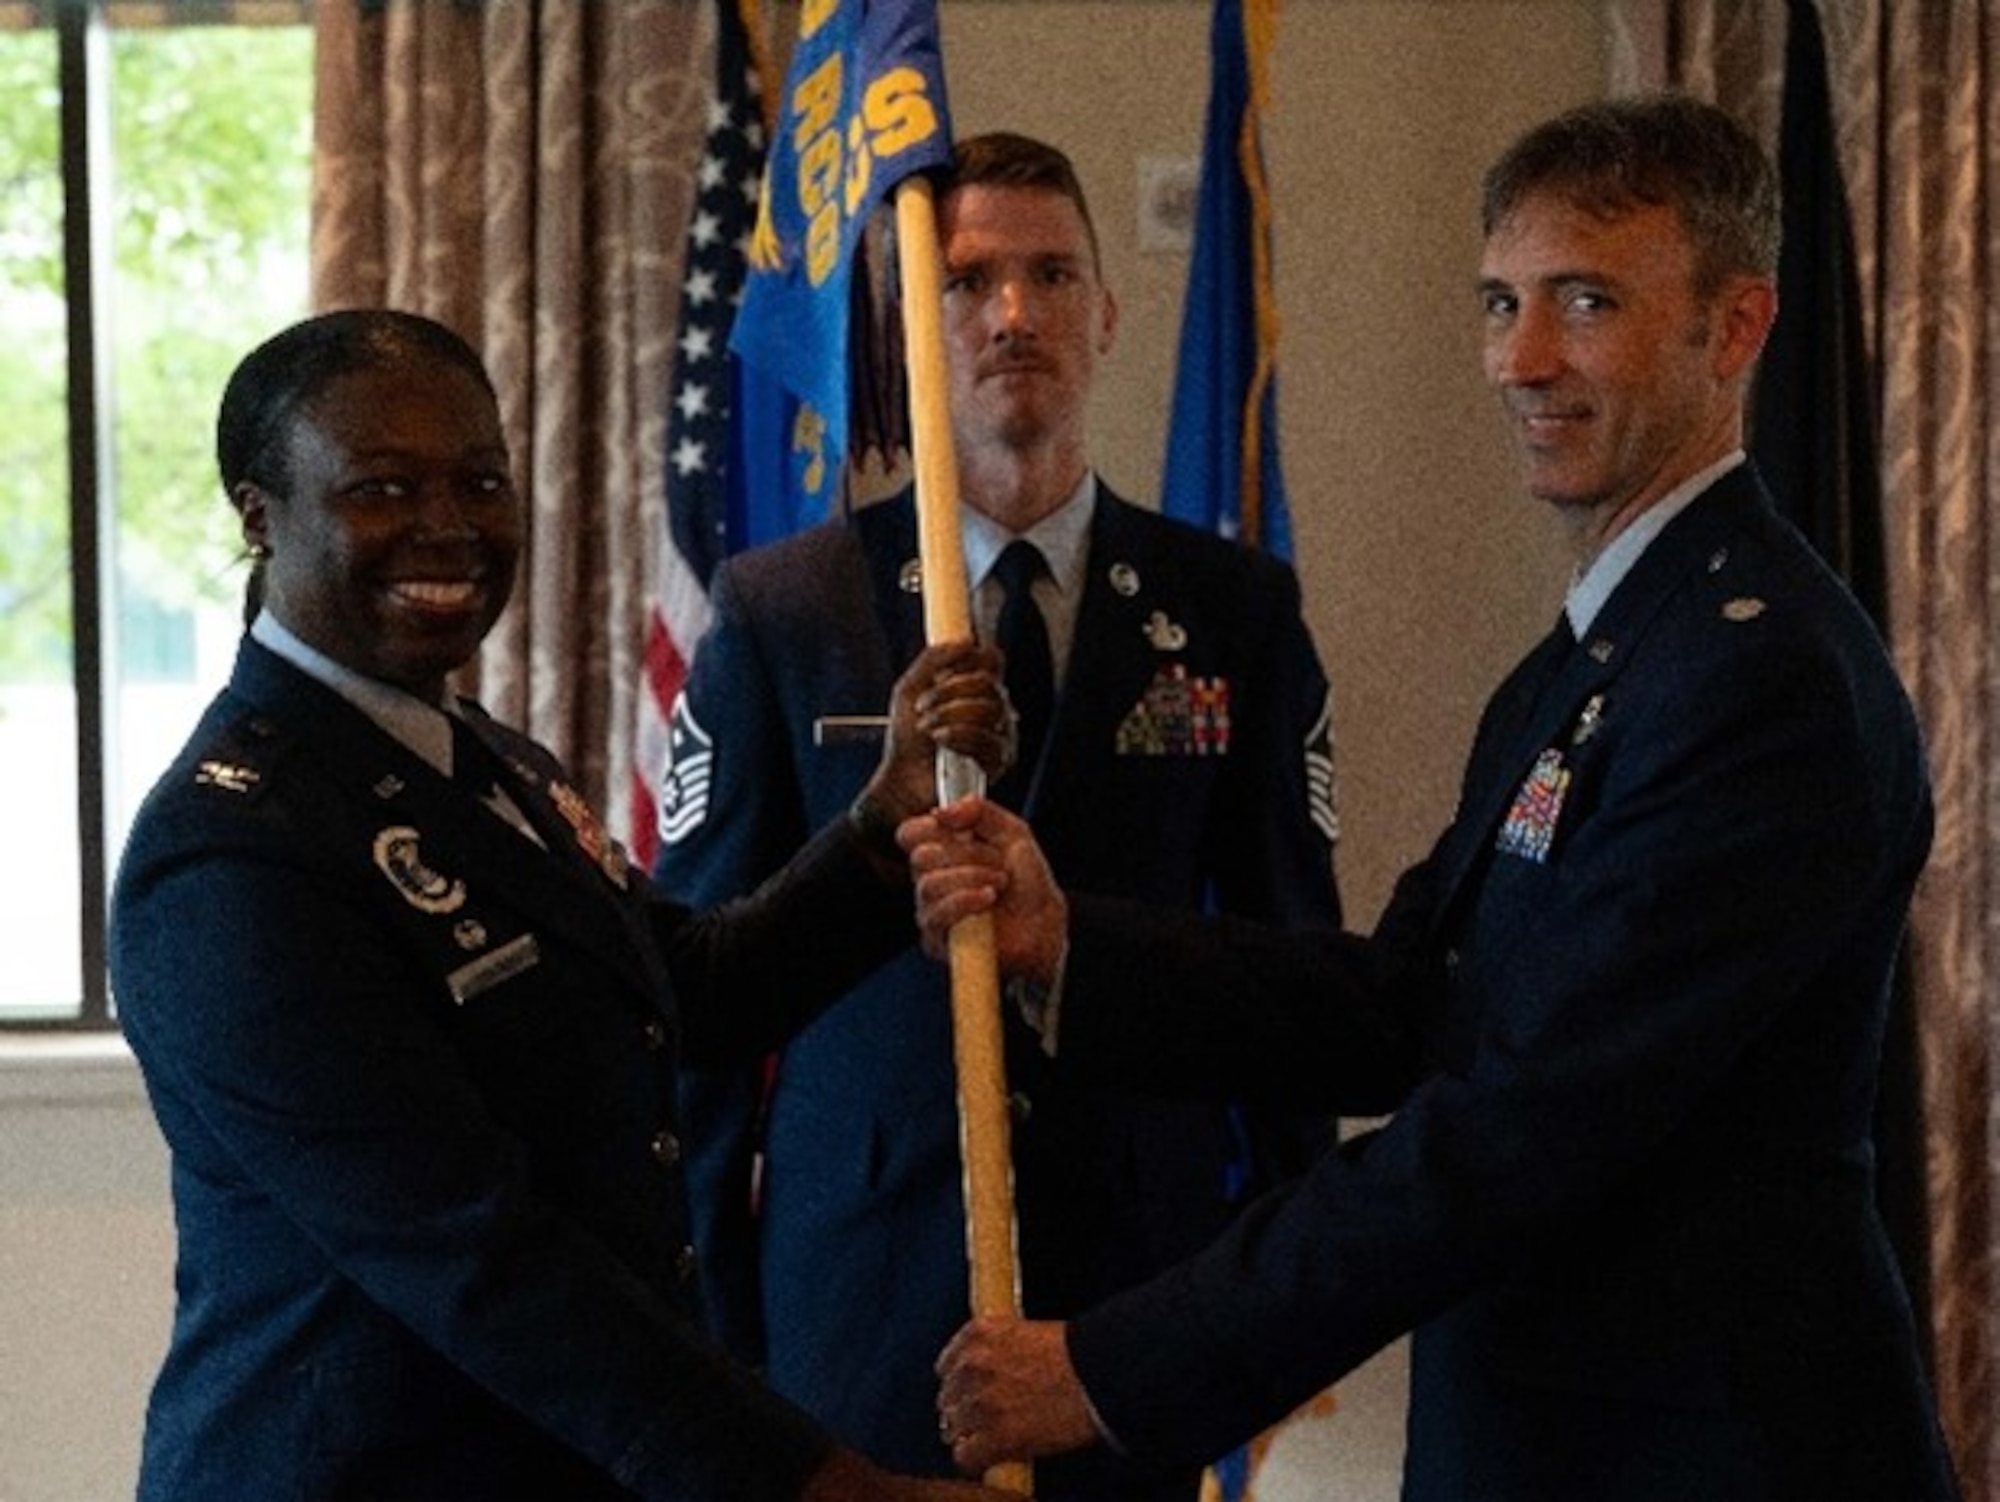 Lt. Col. Matthew Novotney assumes command of the 345th Recruiting Squadron during a Change of Command Ceremony on April 18, 2024, at the River City Casino in Saint Louis, Missouri.